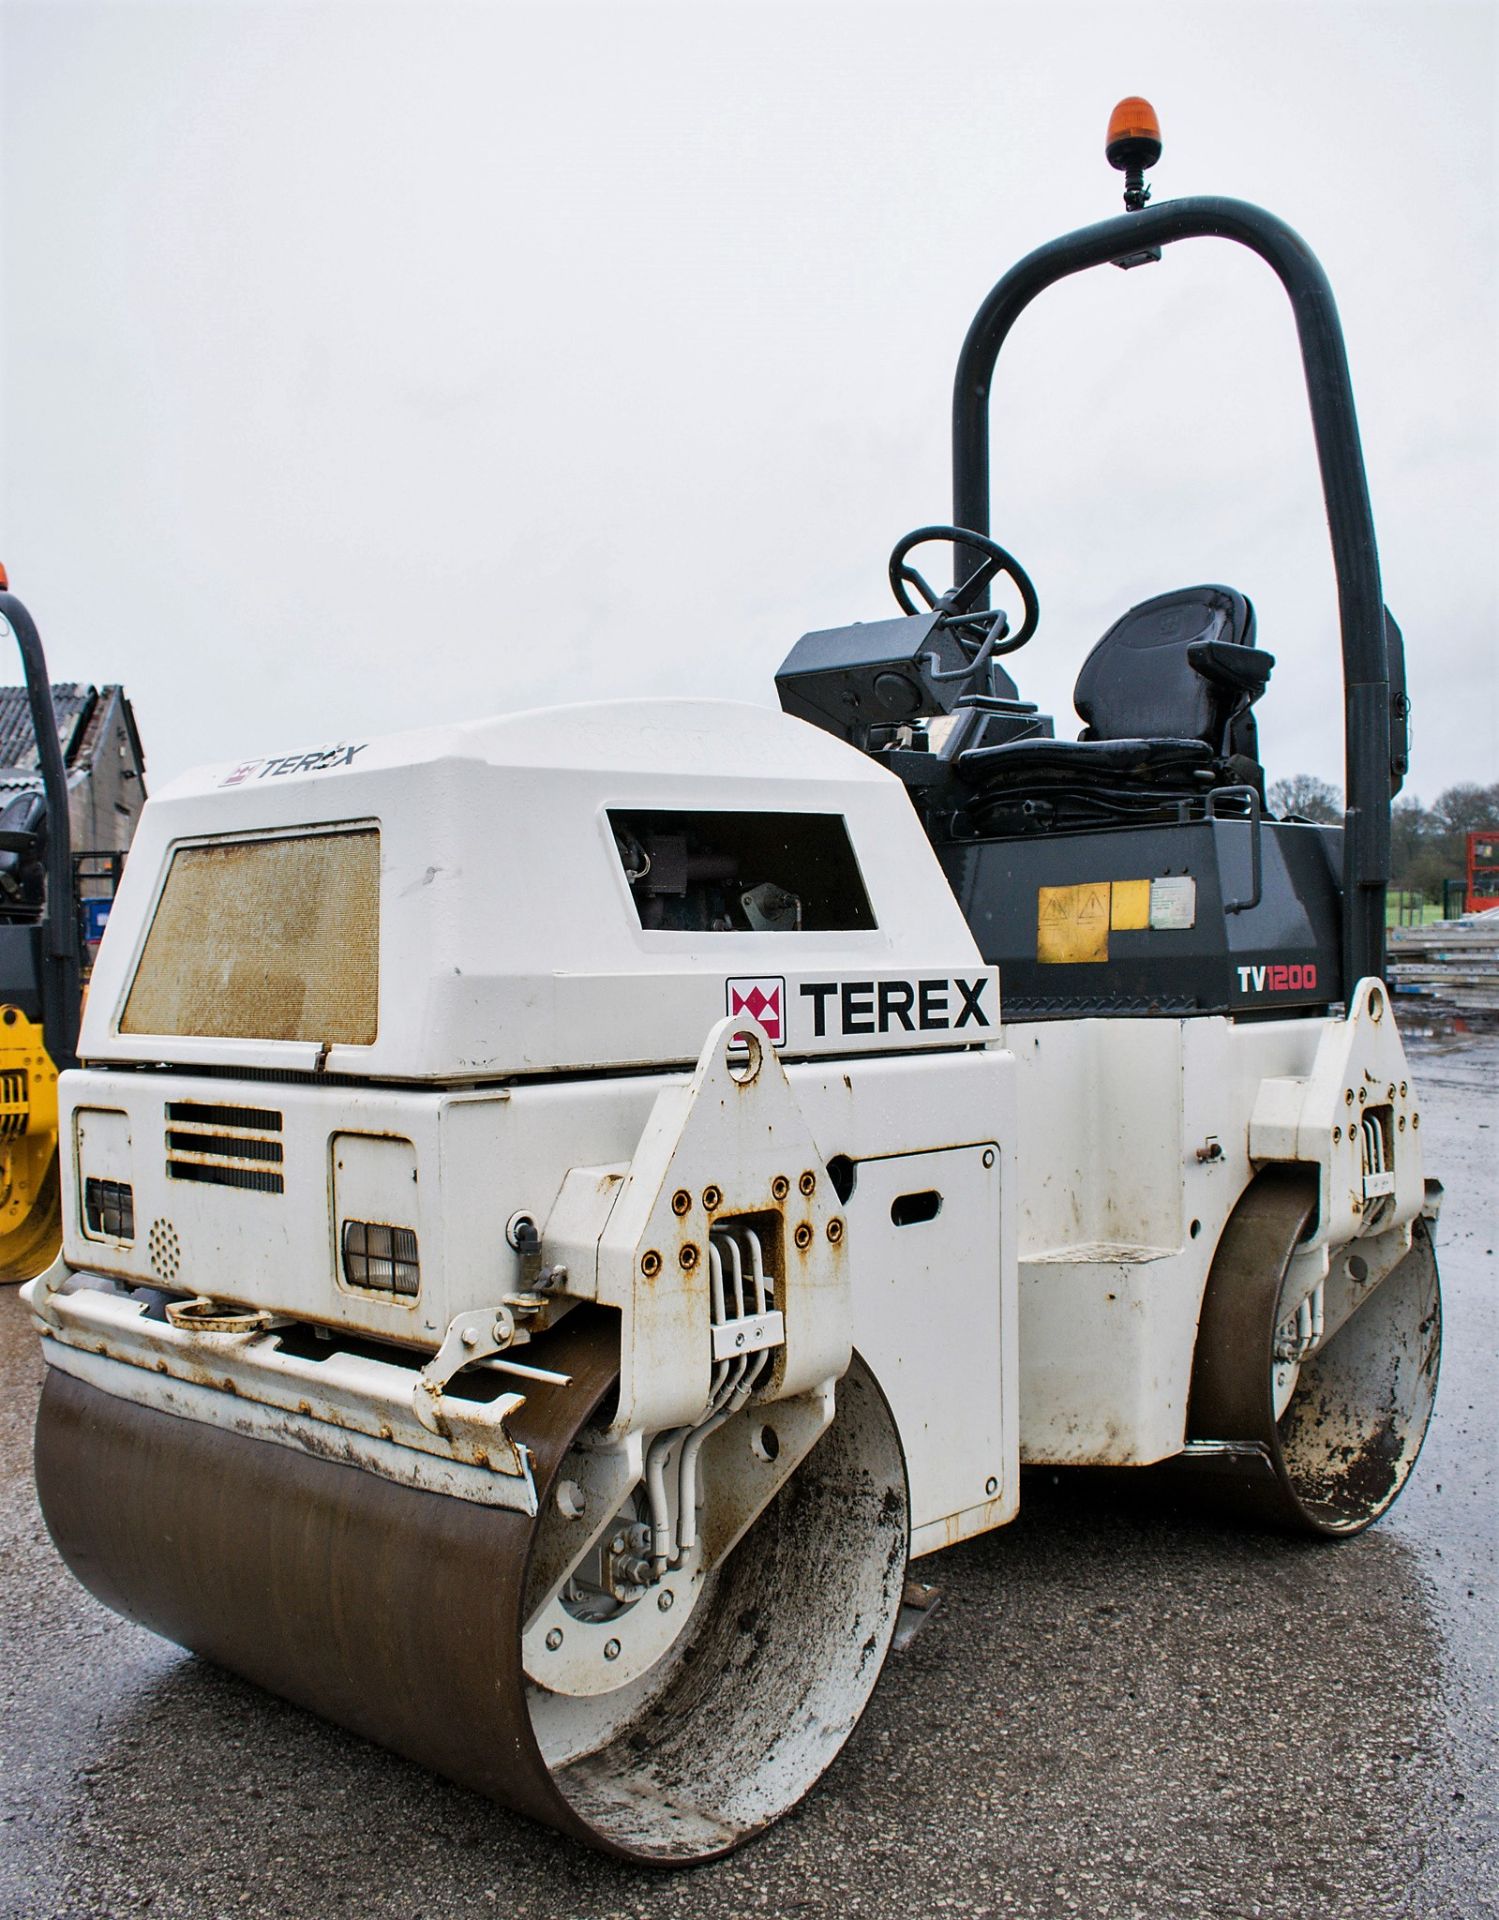 Benford Terex TV1200 double drum ride on roller Year: 2007 S/N: E709CD301 Recorded Hours: 927 P3139